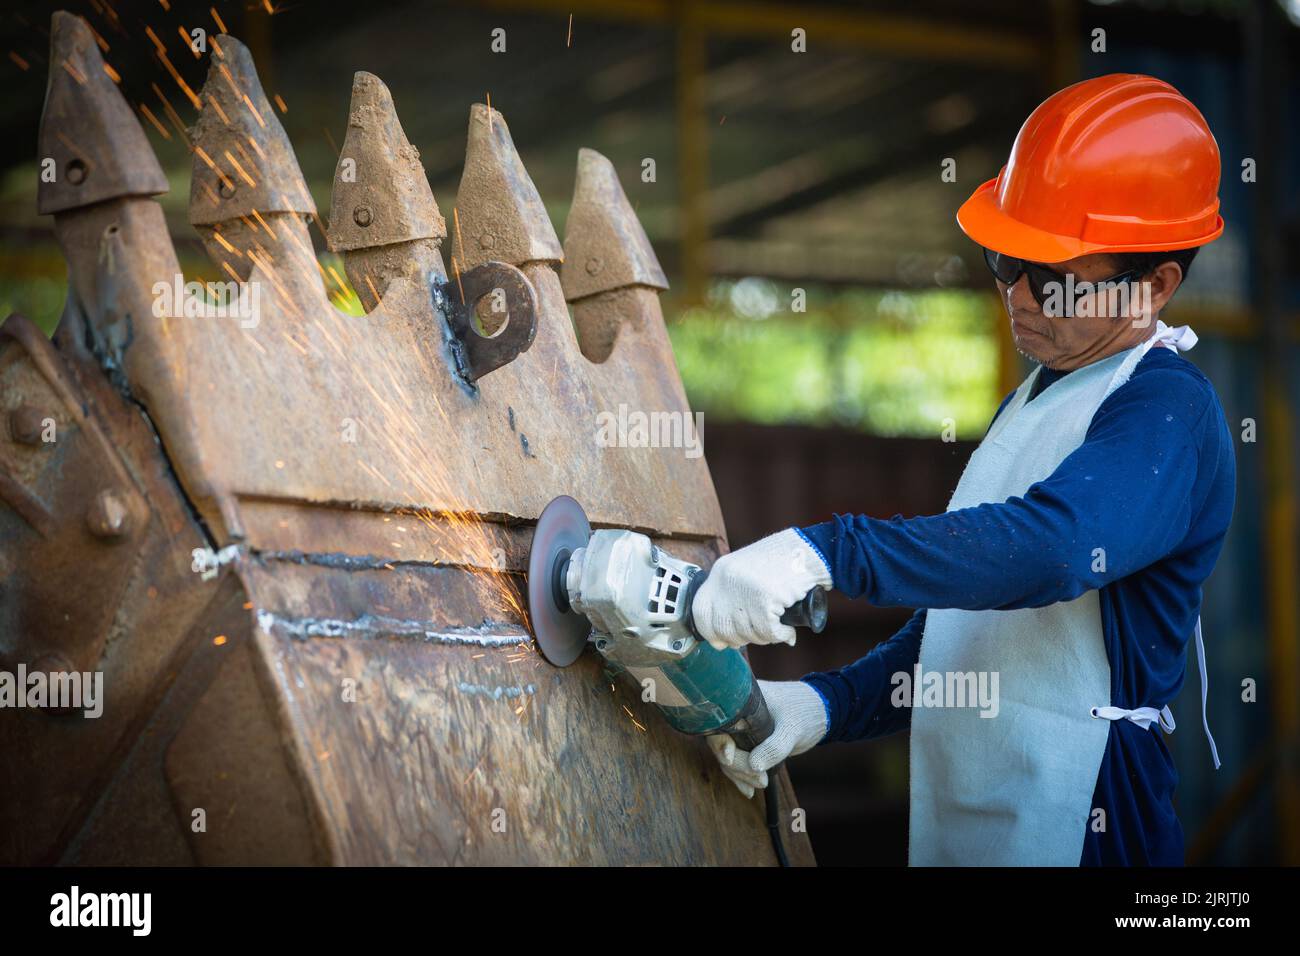 Grinding wheel electric on steel structure in factory sparks from grinding wheel. roughing and polishing metals,   Sparks in metalworking. Stock Photo